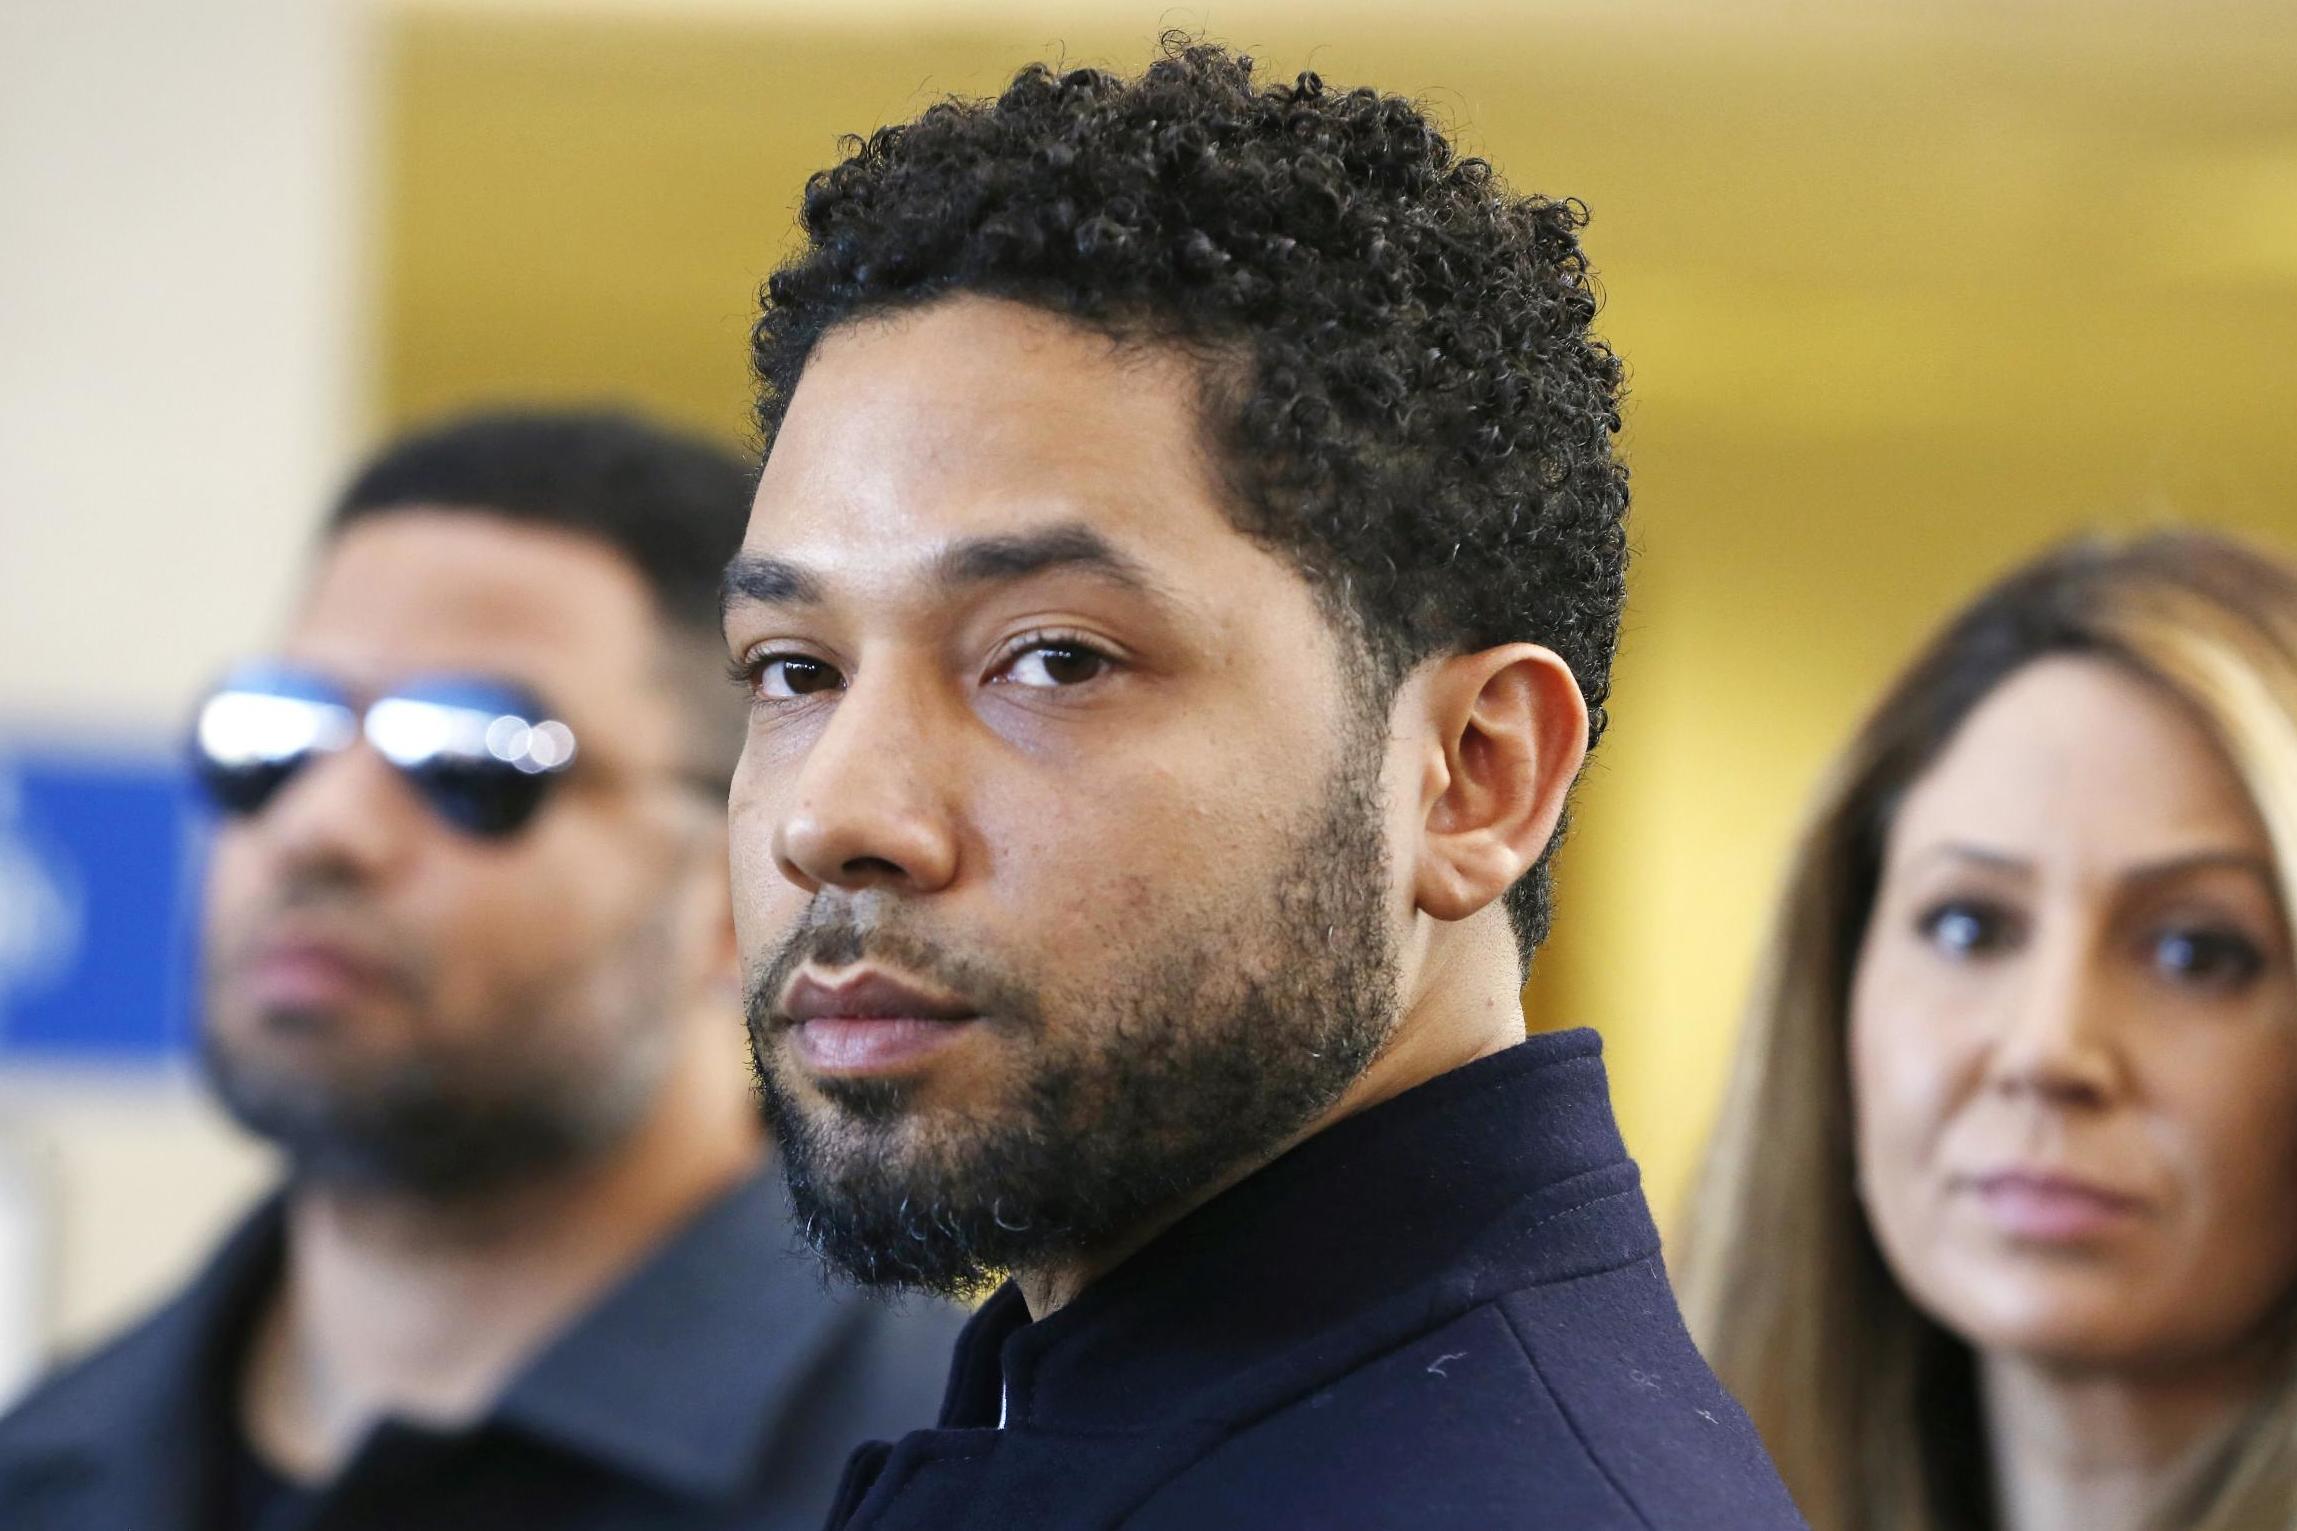 Foxx's office decided not to pursue Smollett's prosecution, claiming they made a deal which Smollett denies